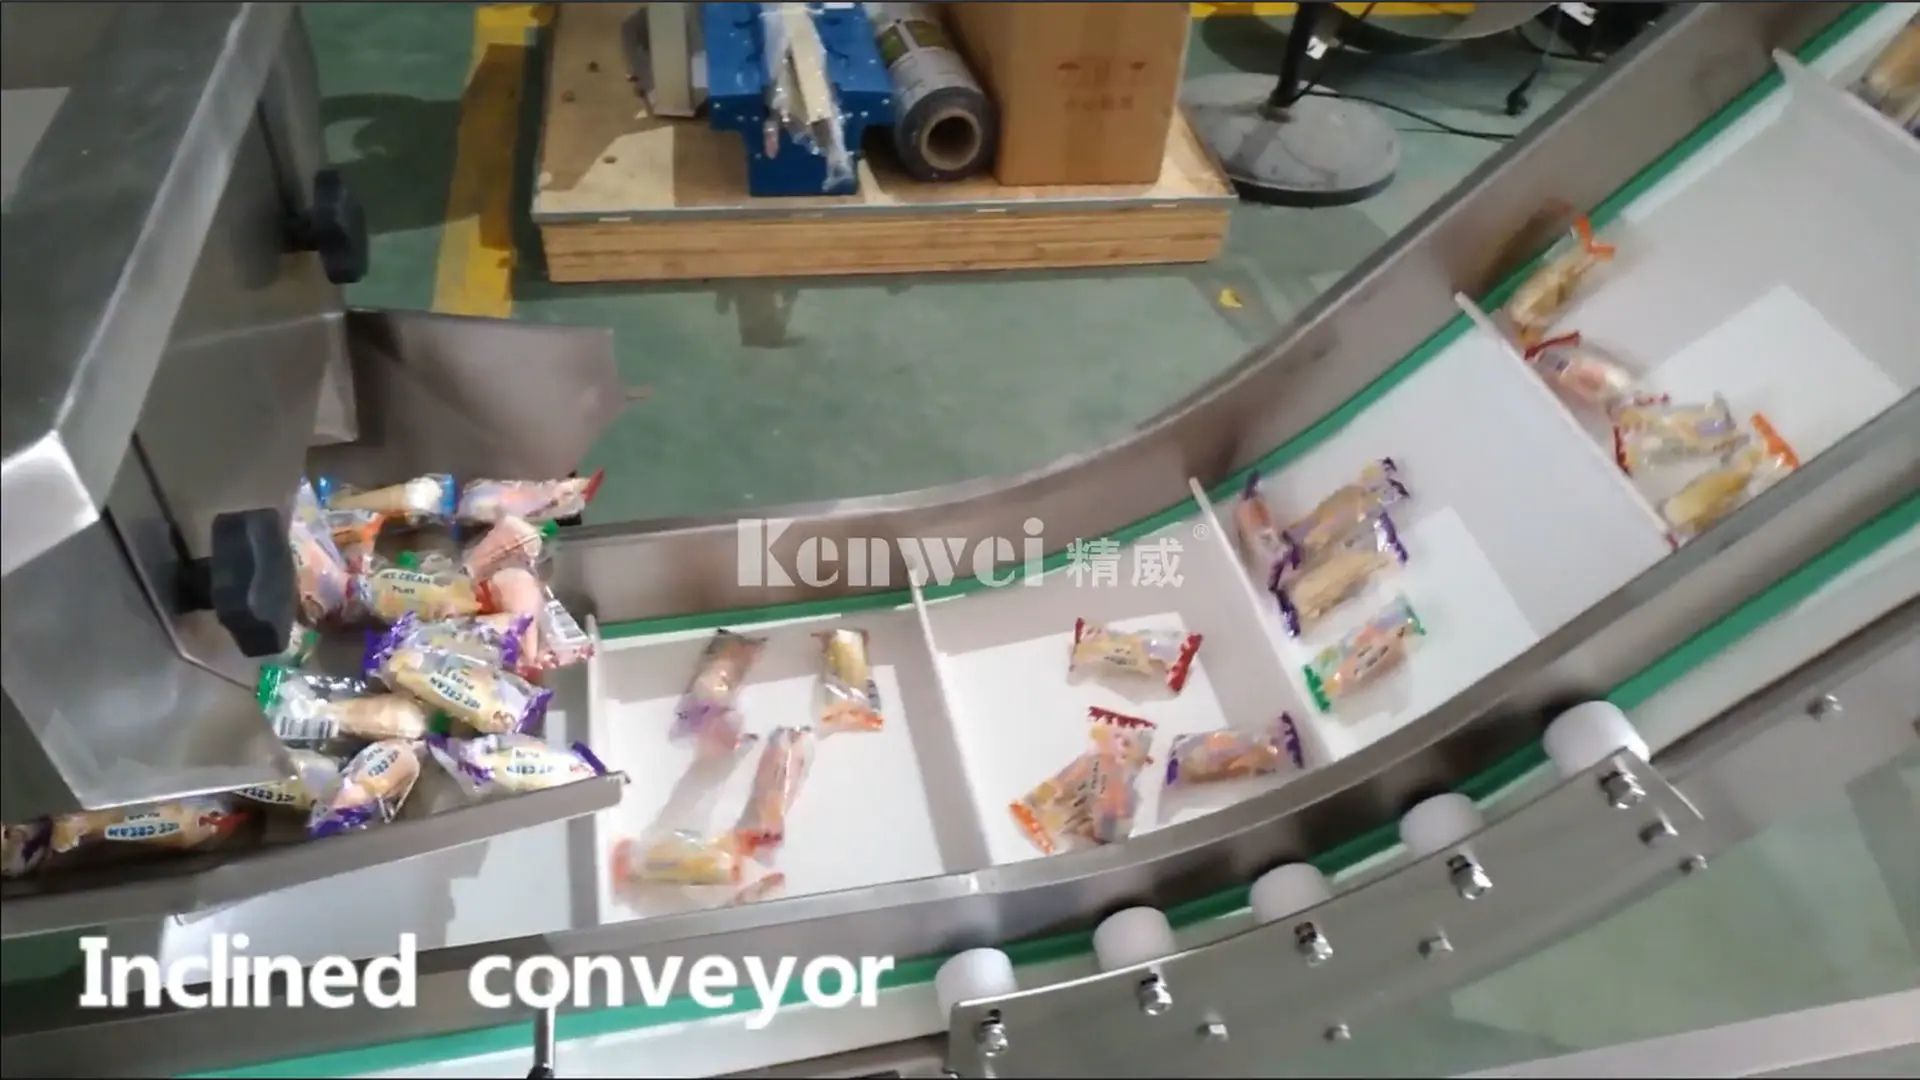 Inclined conveyor in packaging system